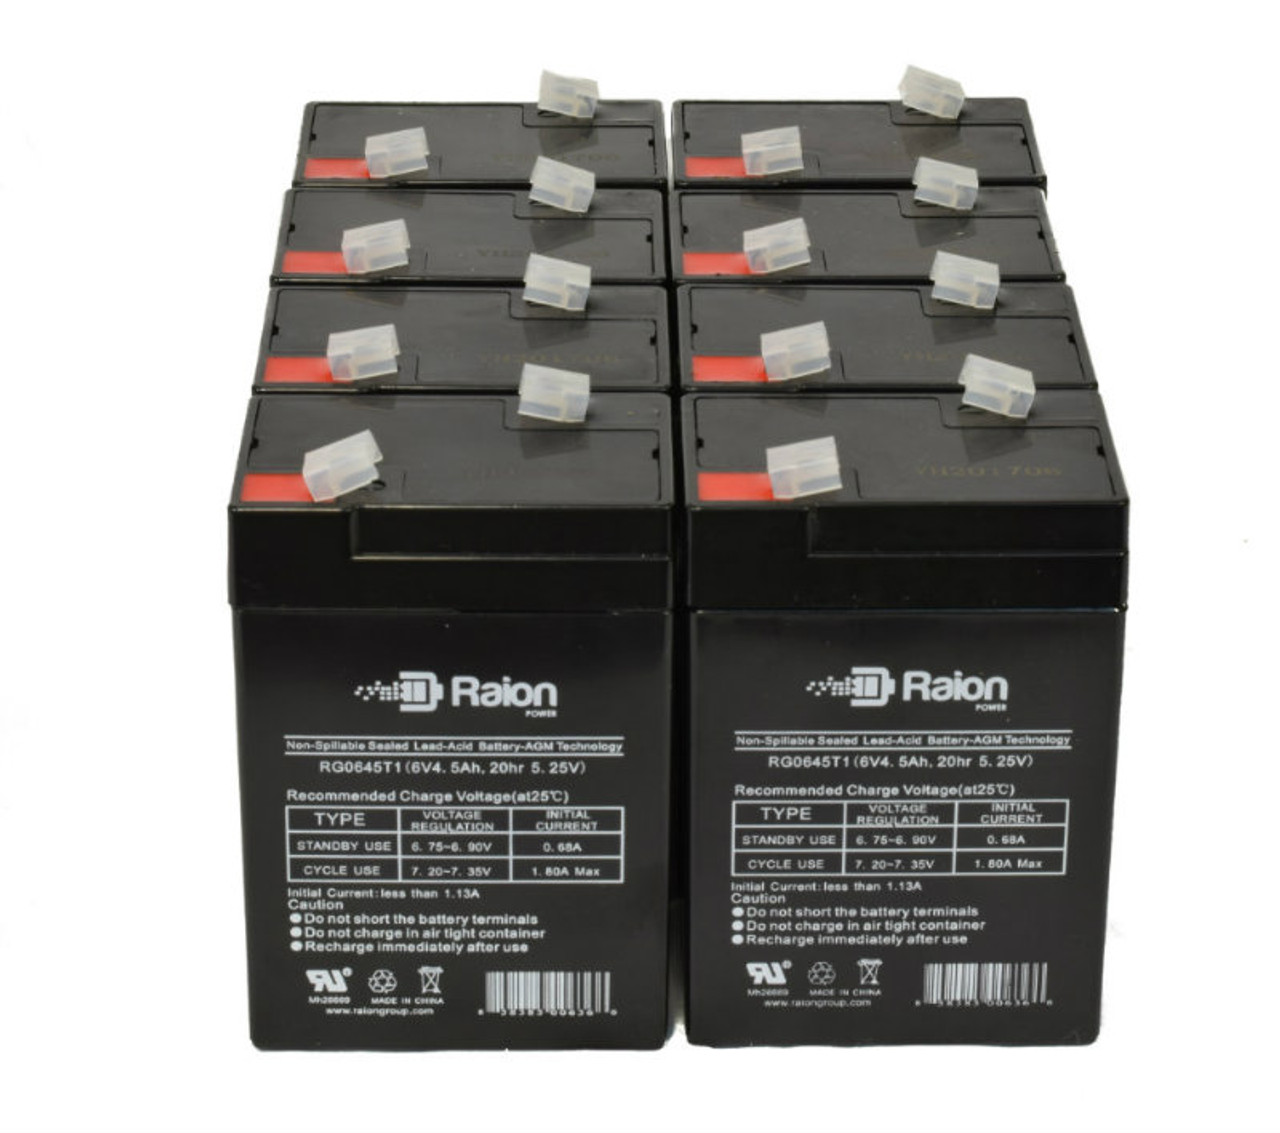 Raion Power 6 Volt 4.5Ah RG0645T1 Replacement Battery for Fuli FL645 - 8 Pack